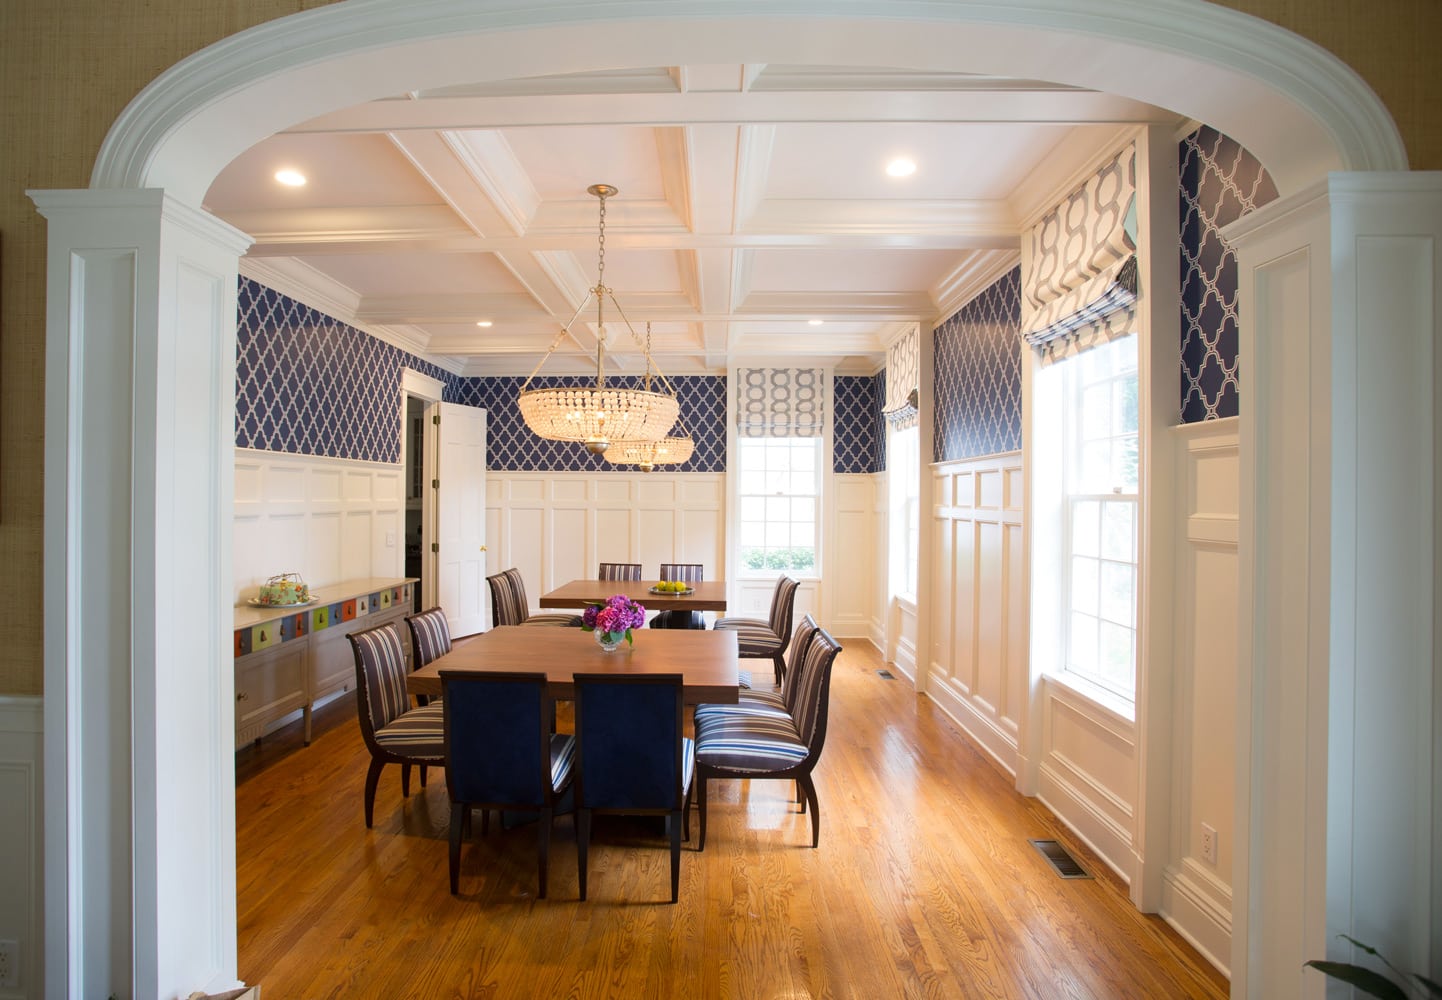 Grand colonial home dining room design by Annette Jaffe Interiors